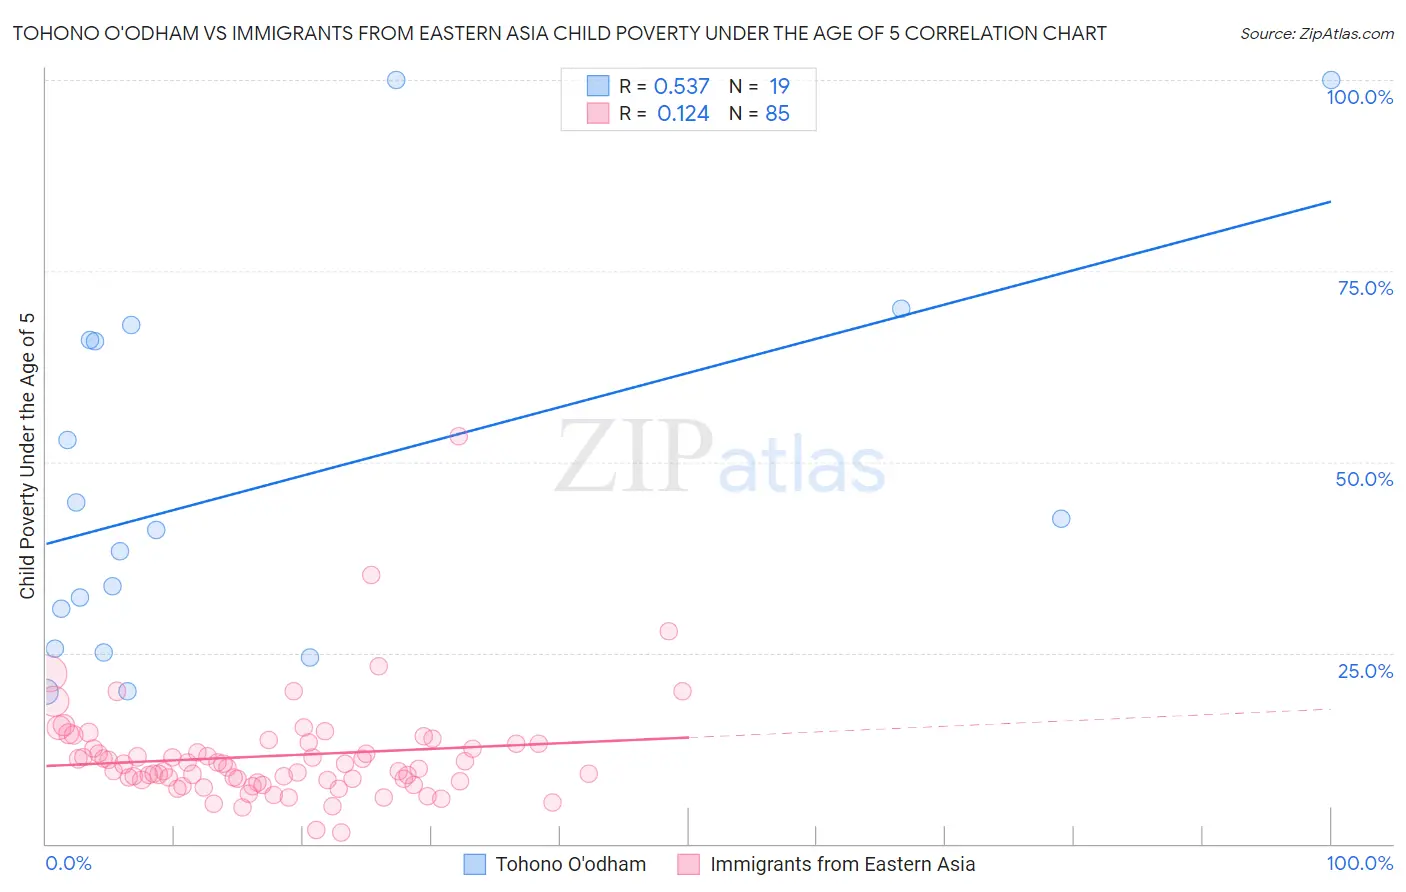 Tohono O'odham vs Immigrants from Eastern Asia Child Poverty Under the Age of 5